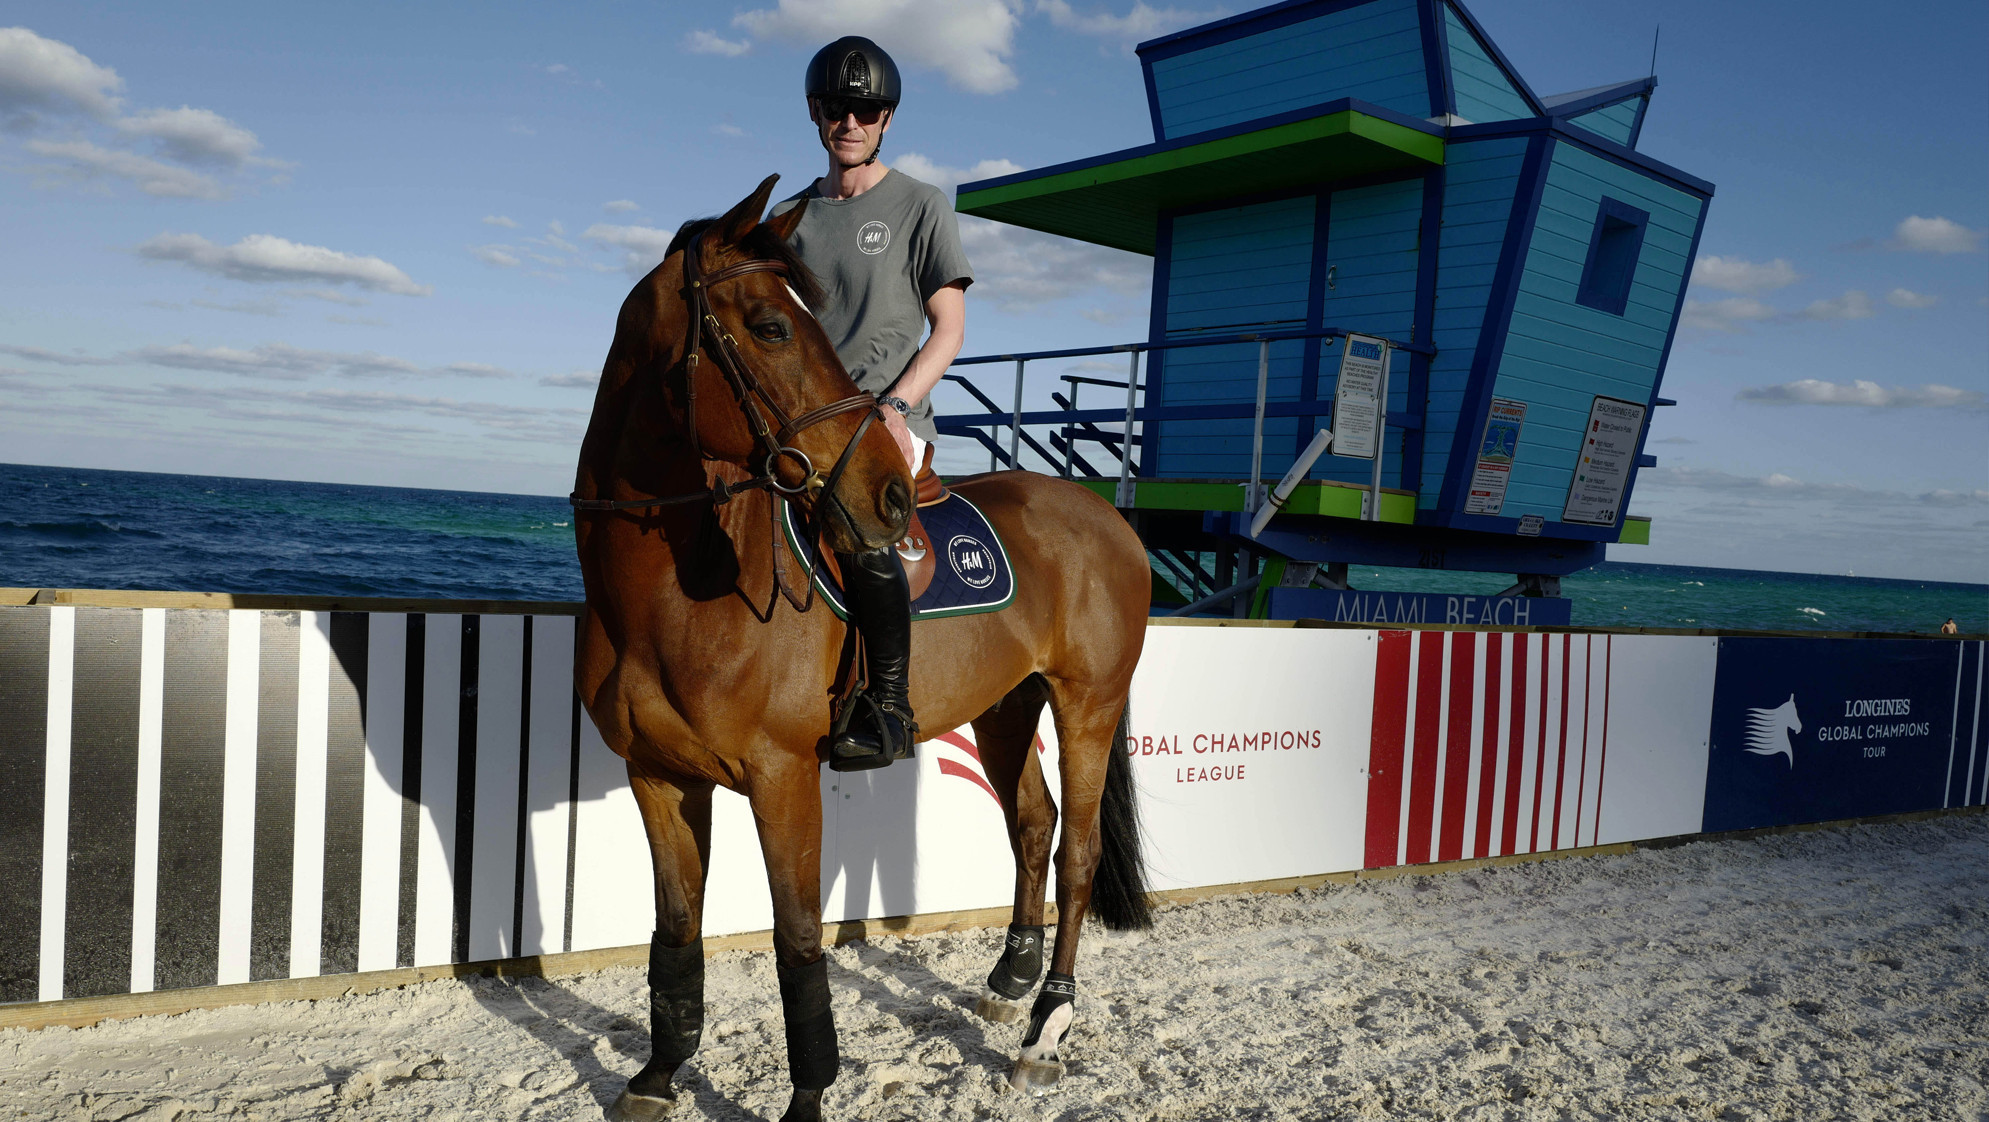 The Longines Global Champions Tour is set to continue in Miami Beach tomorrow ©LGCT/Stefano Grasso